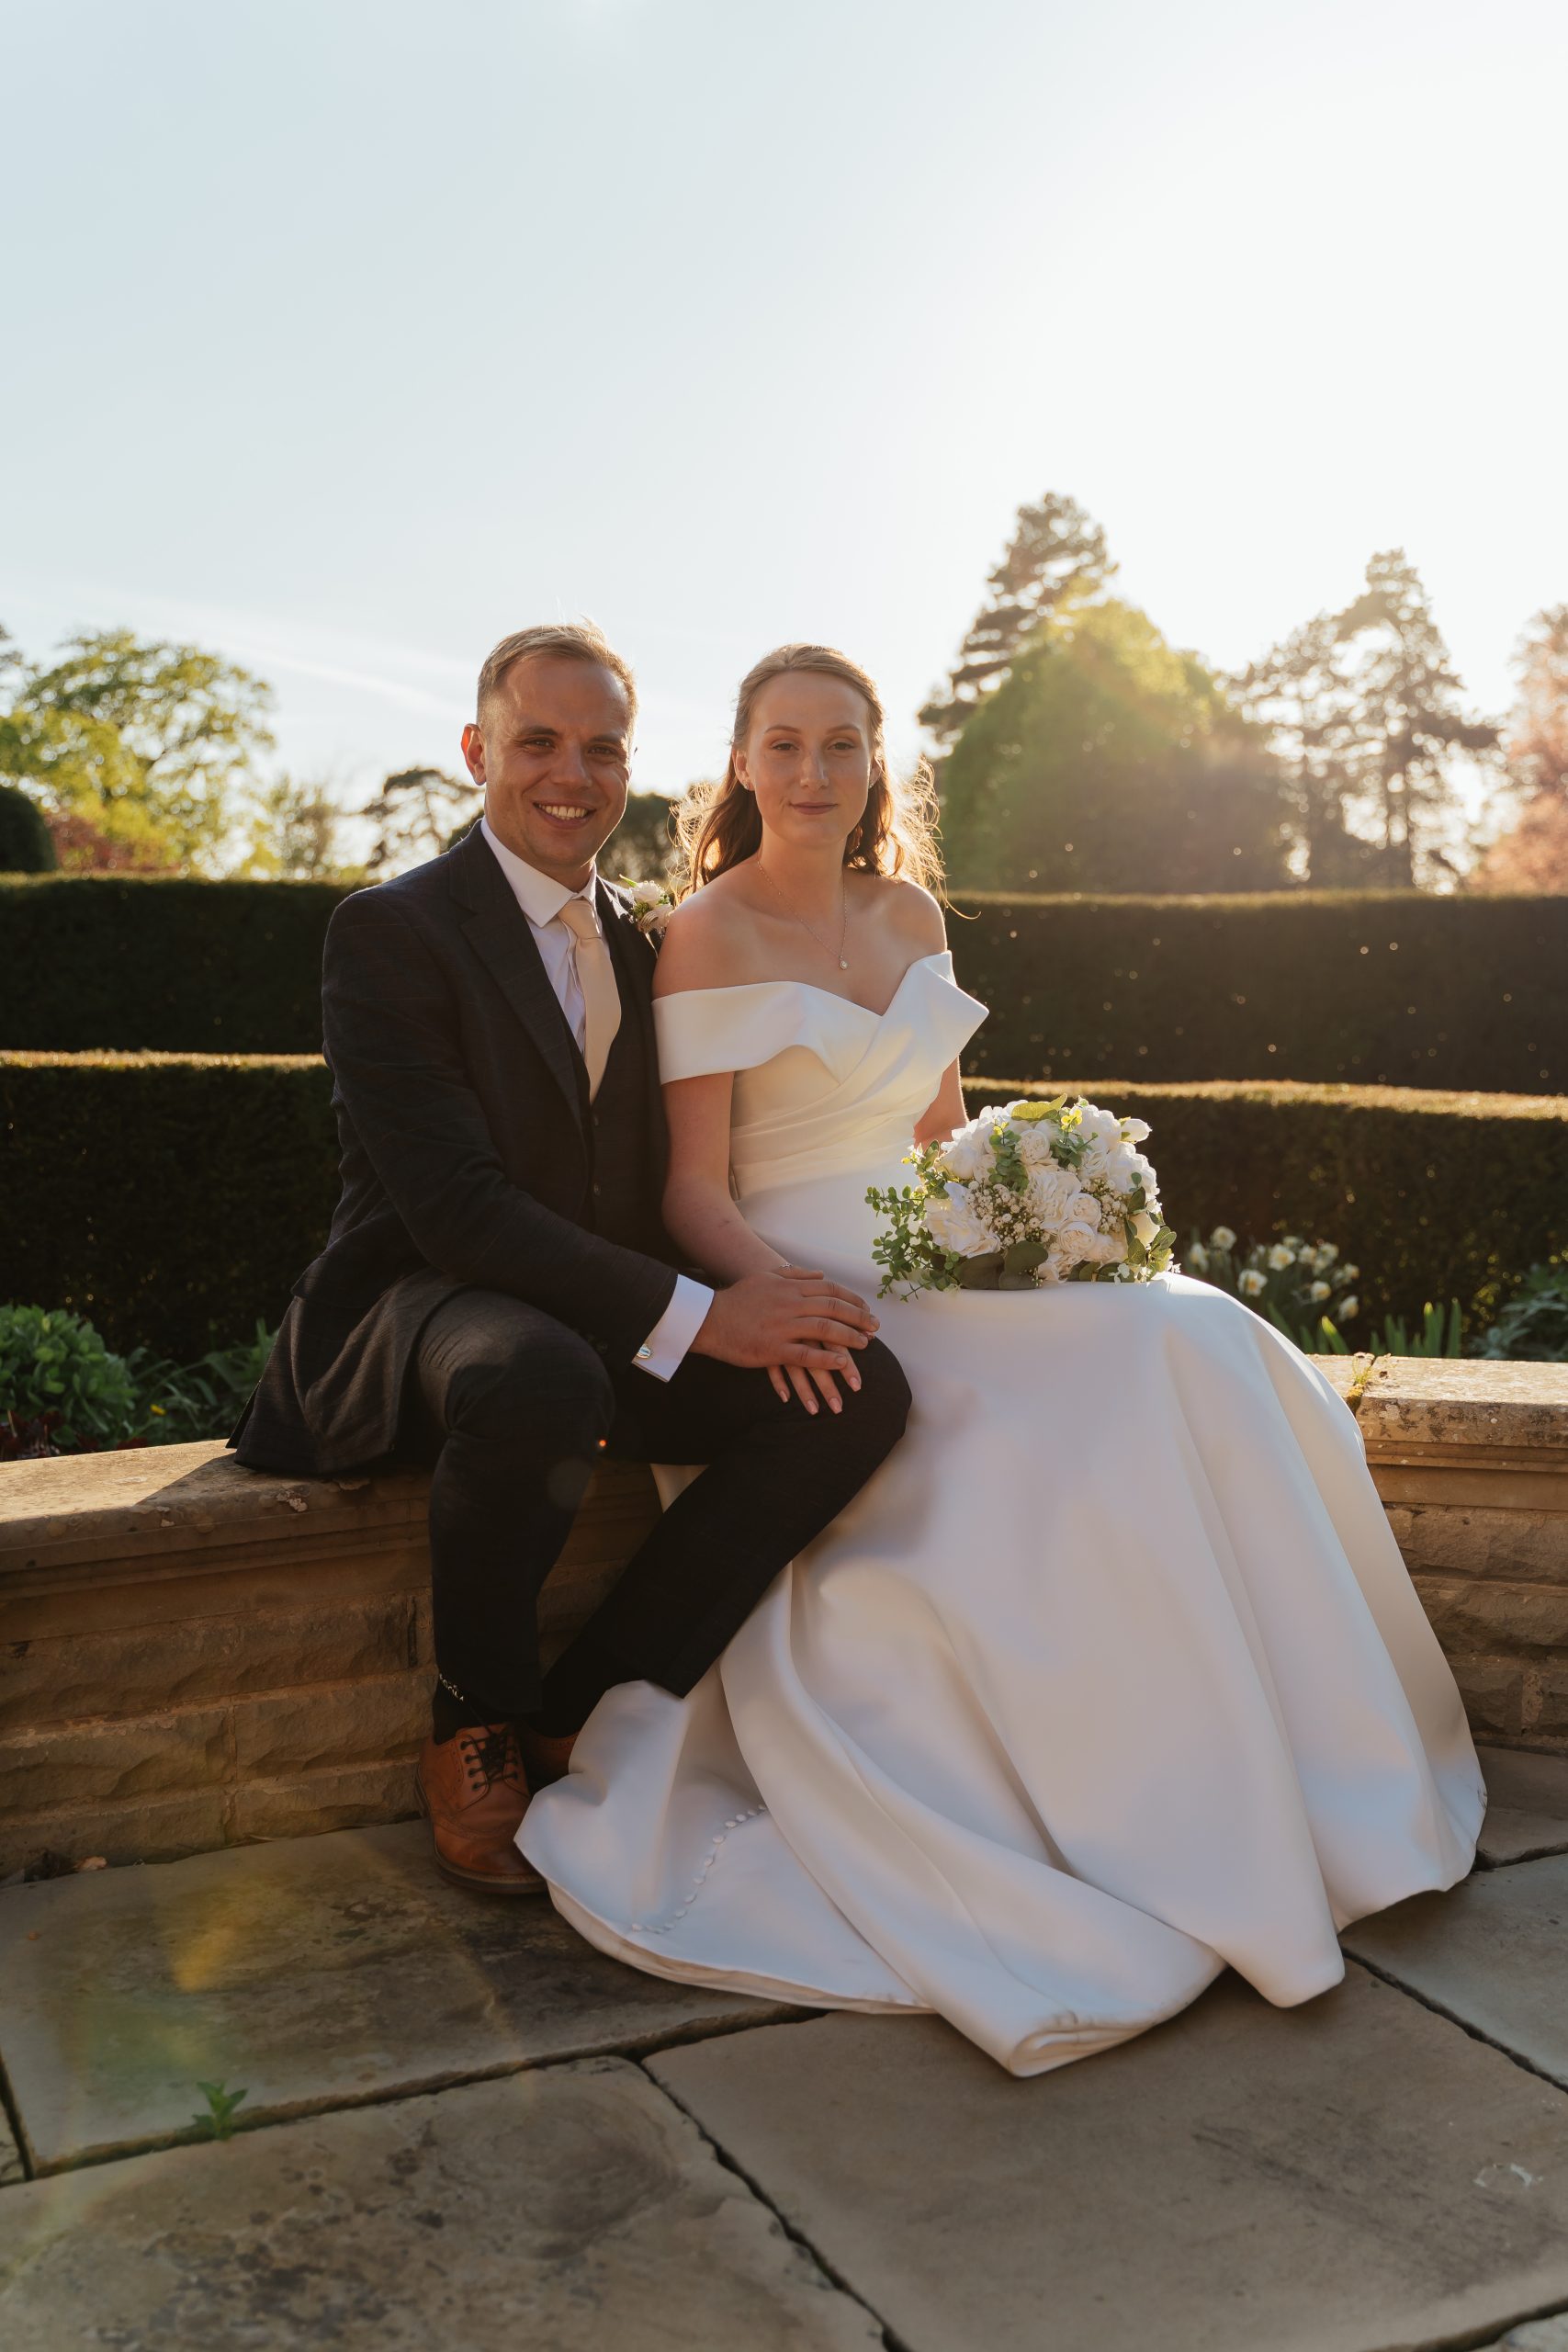 A couple snuggled up under a blossom tree at Fanhams Hall in Golden Hour